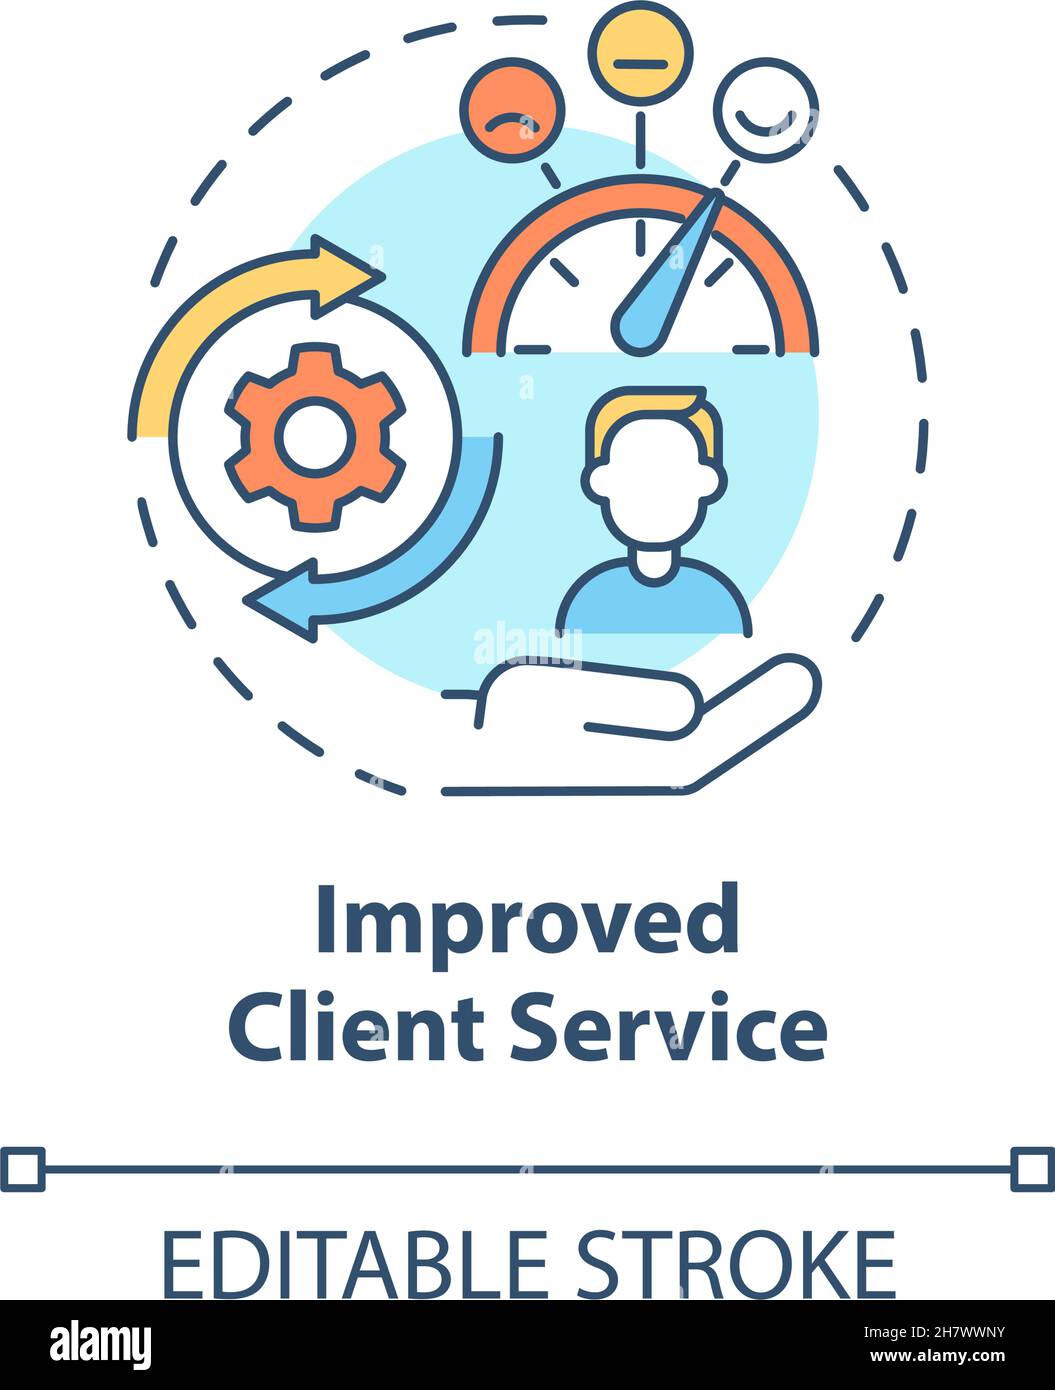 Improved client service concept icon Stock Vector